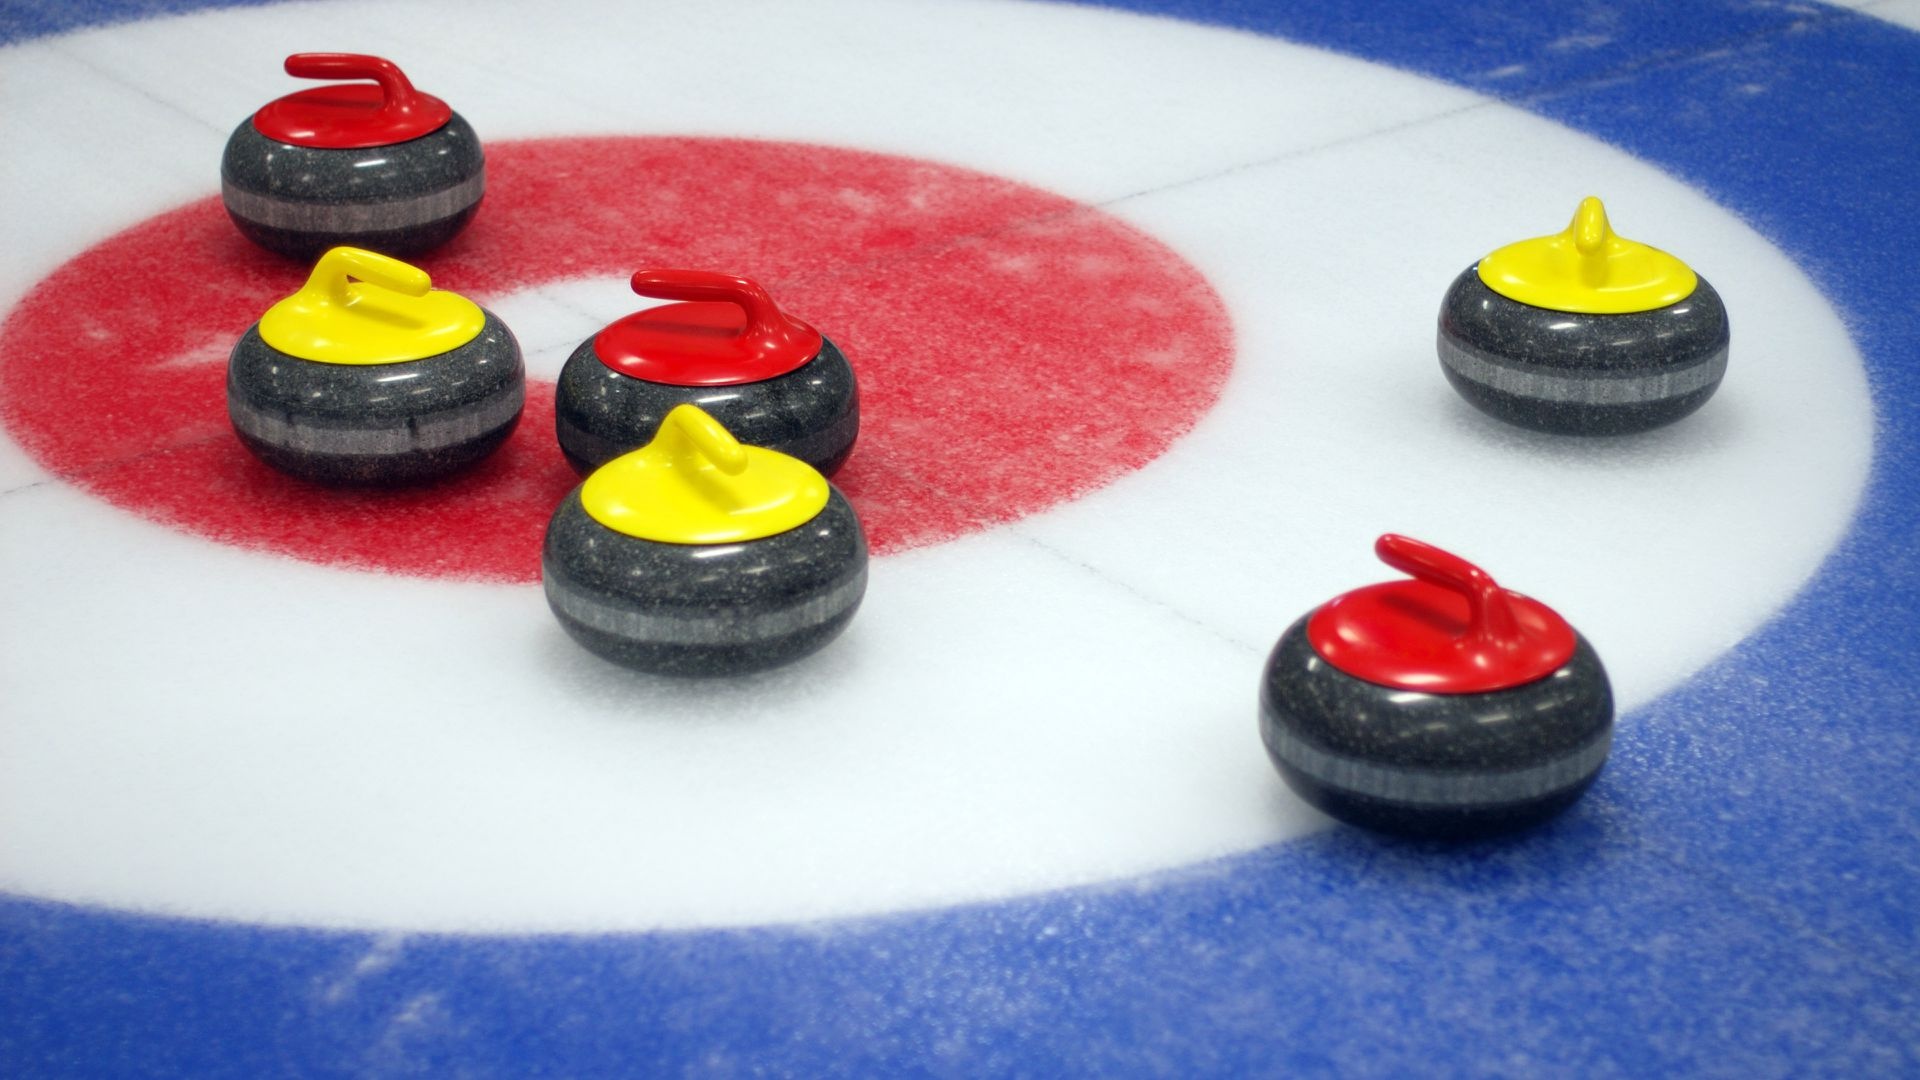 Curling: Rocks on the ice, The winter sports discipline, Competitive sport. 1920x1080 Full HD Wallpaper.